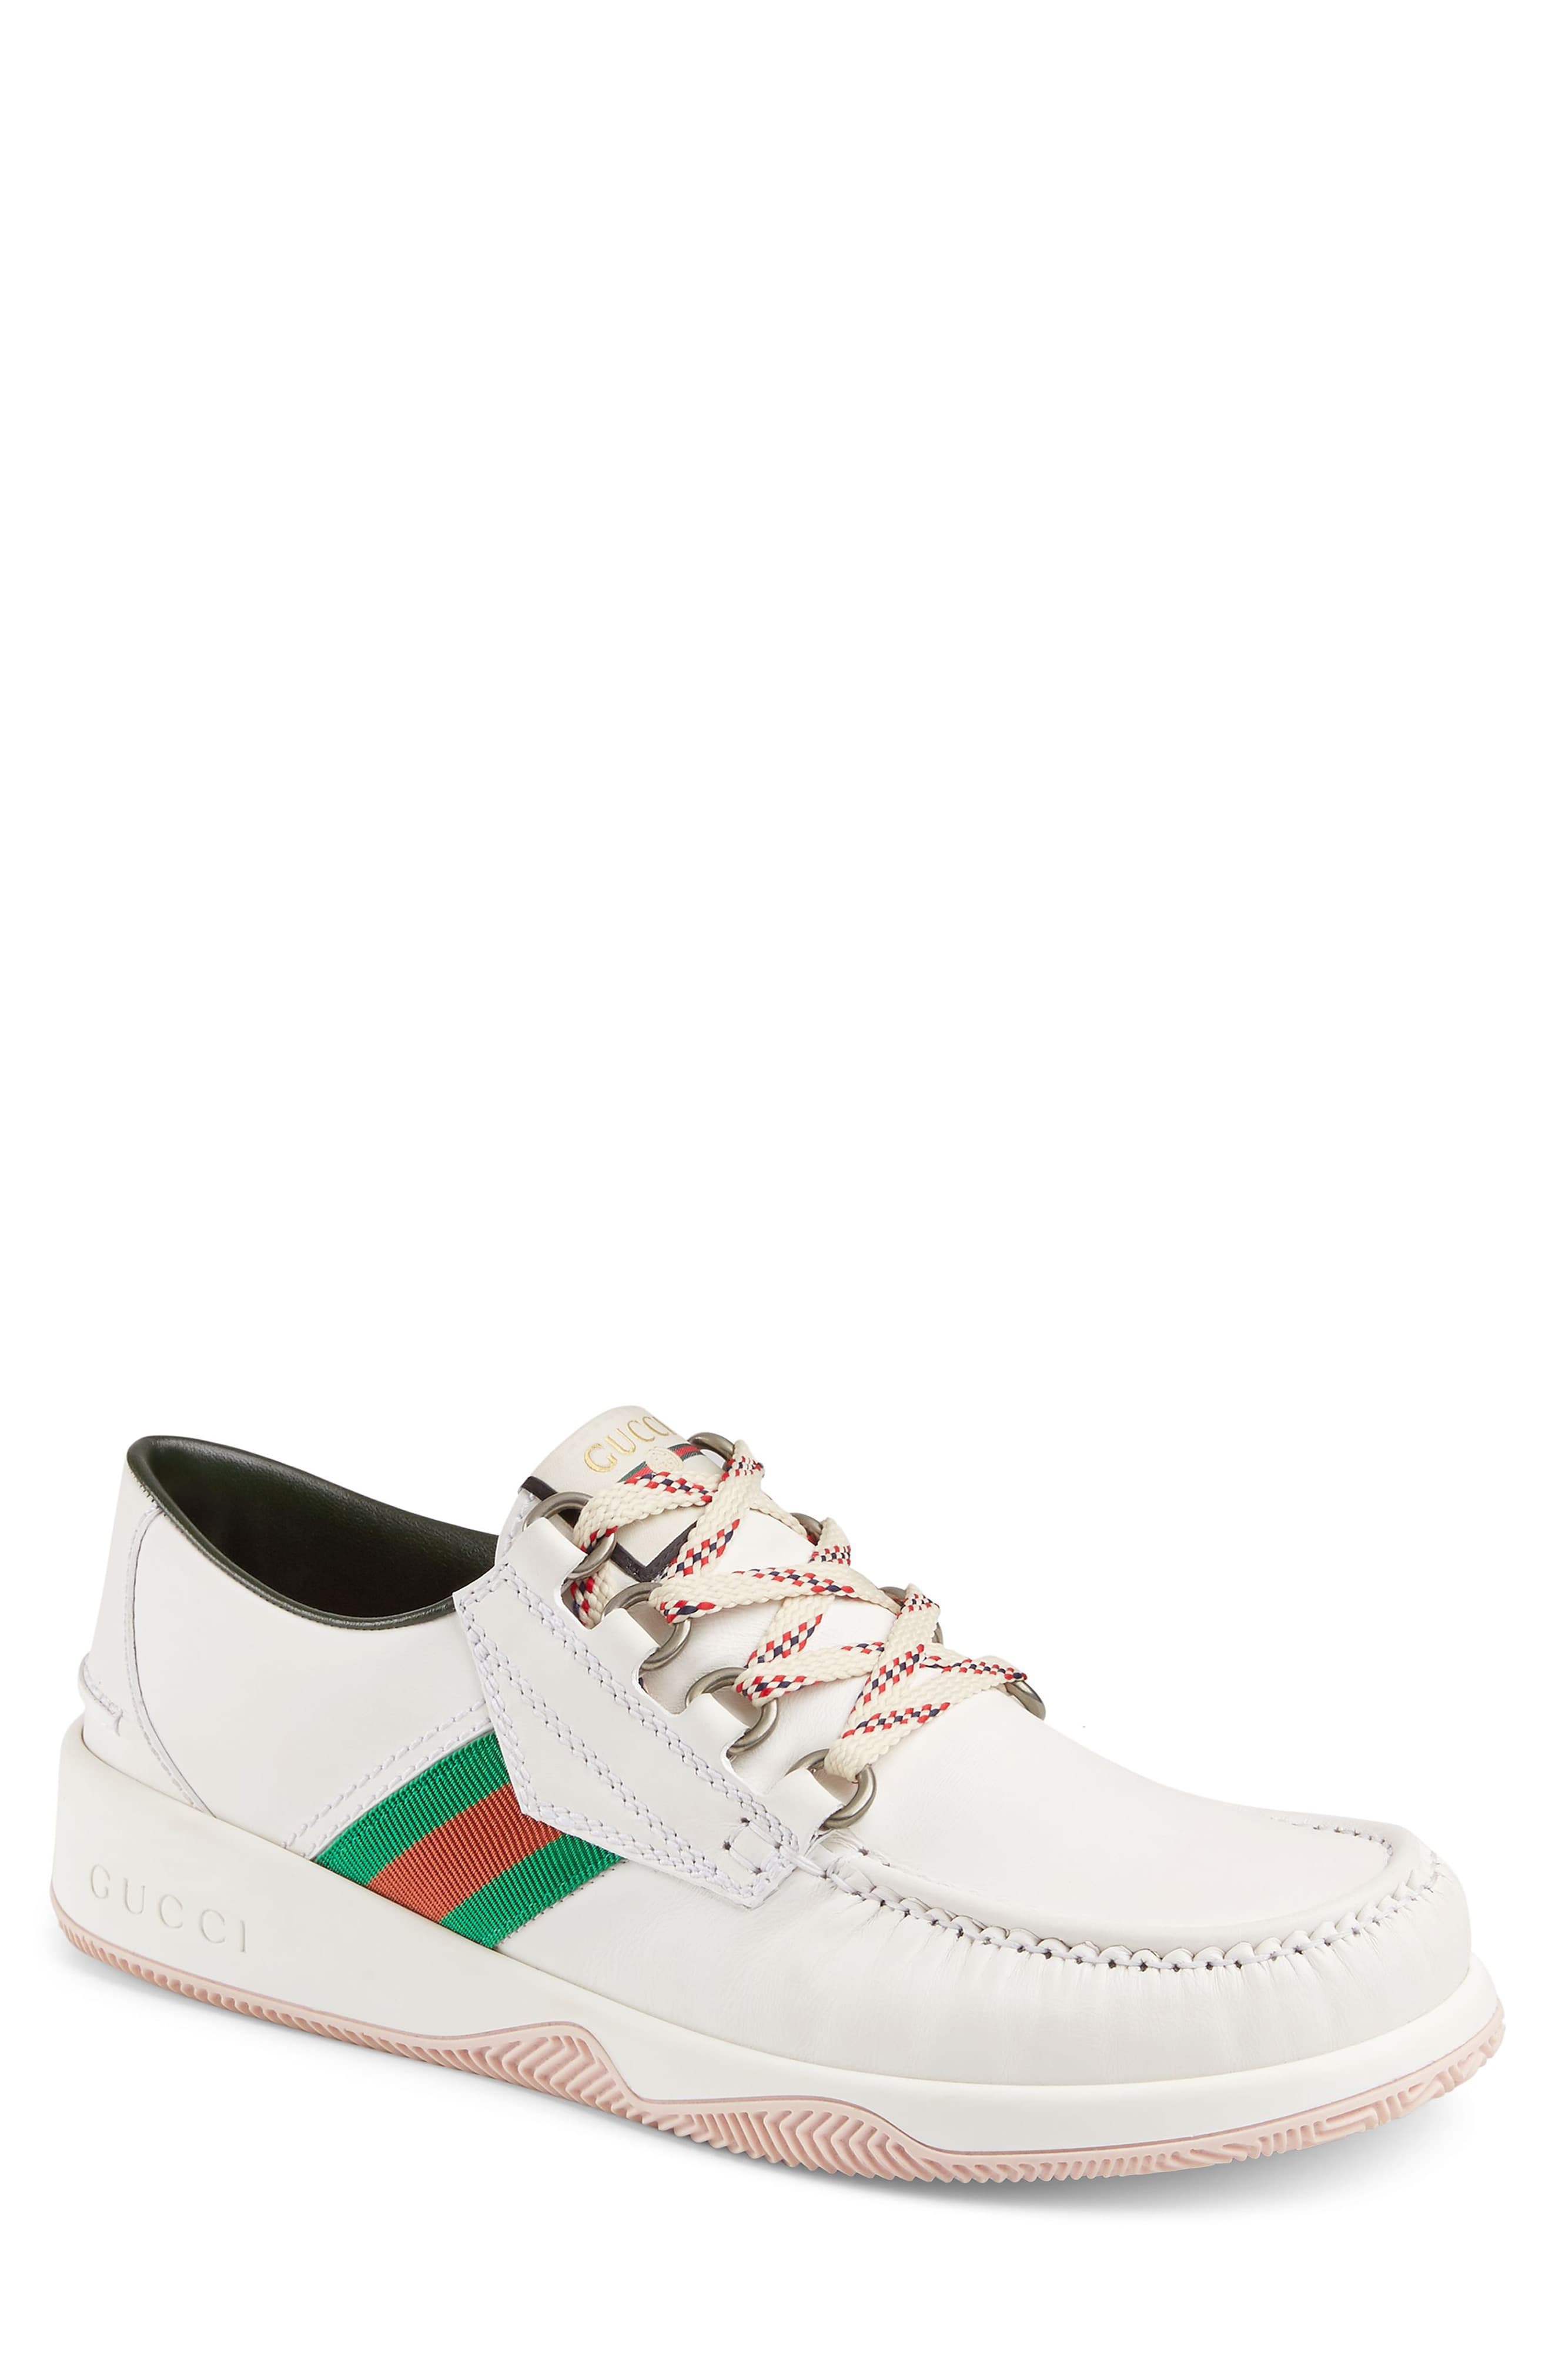 gucci boat shoes